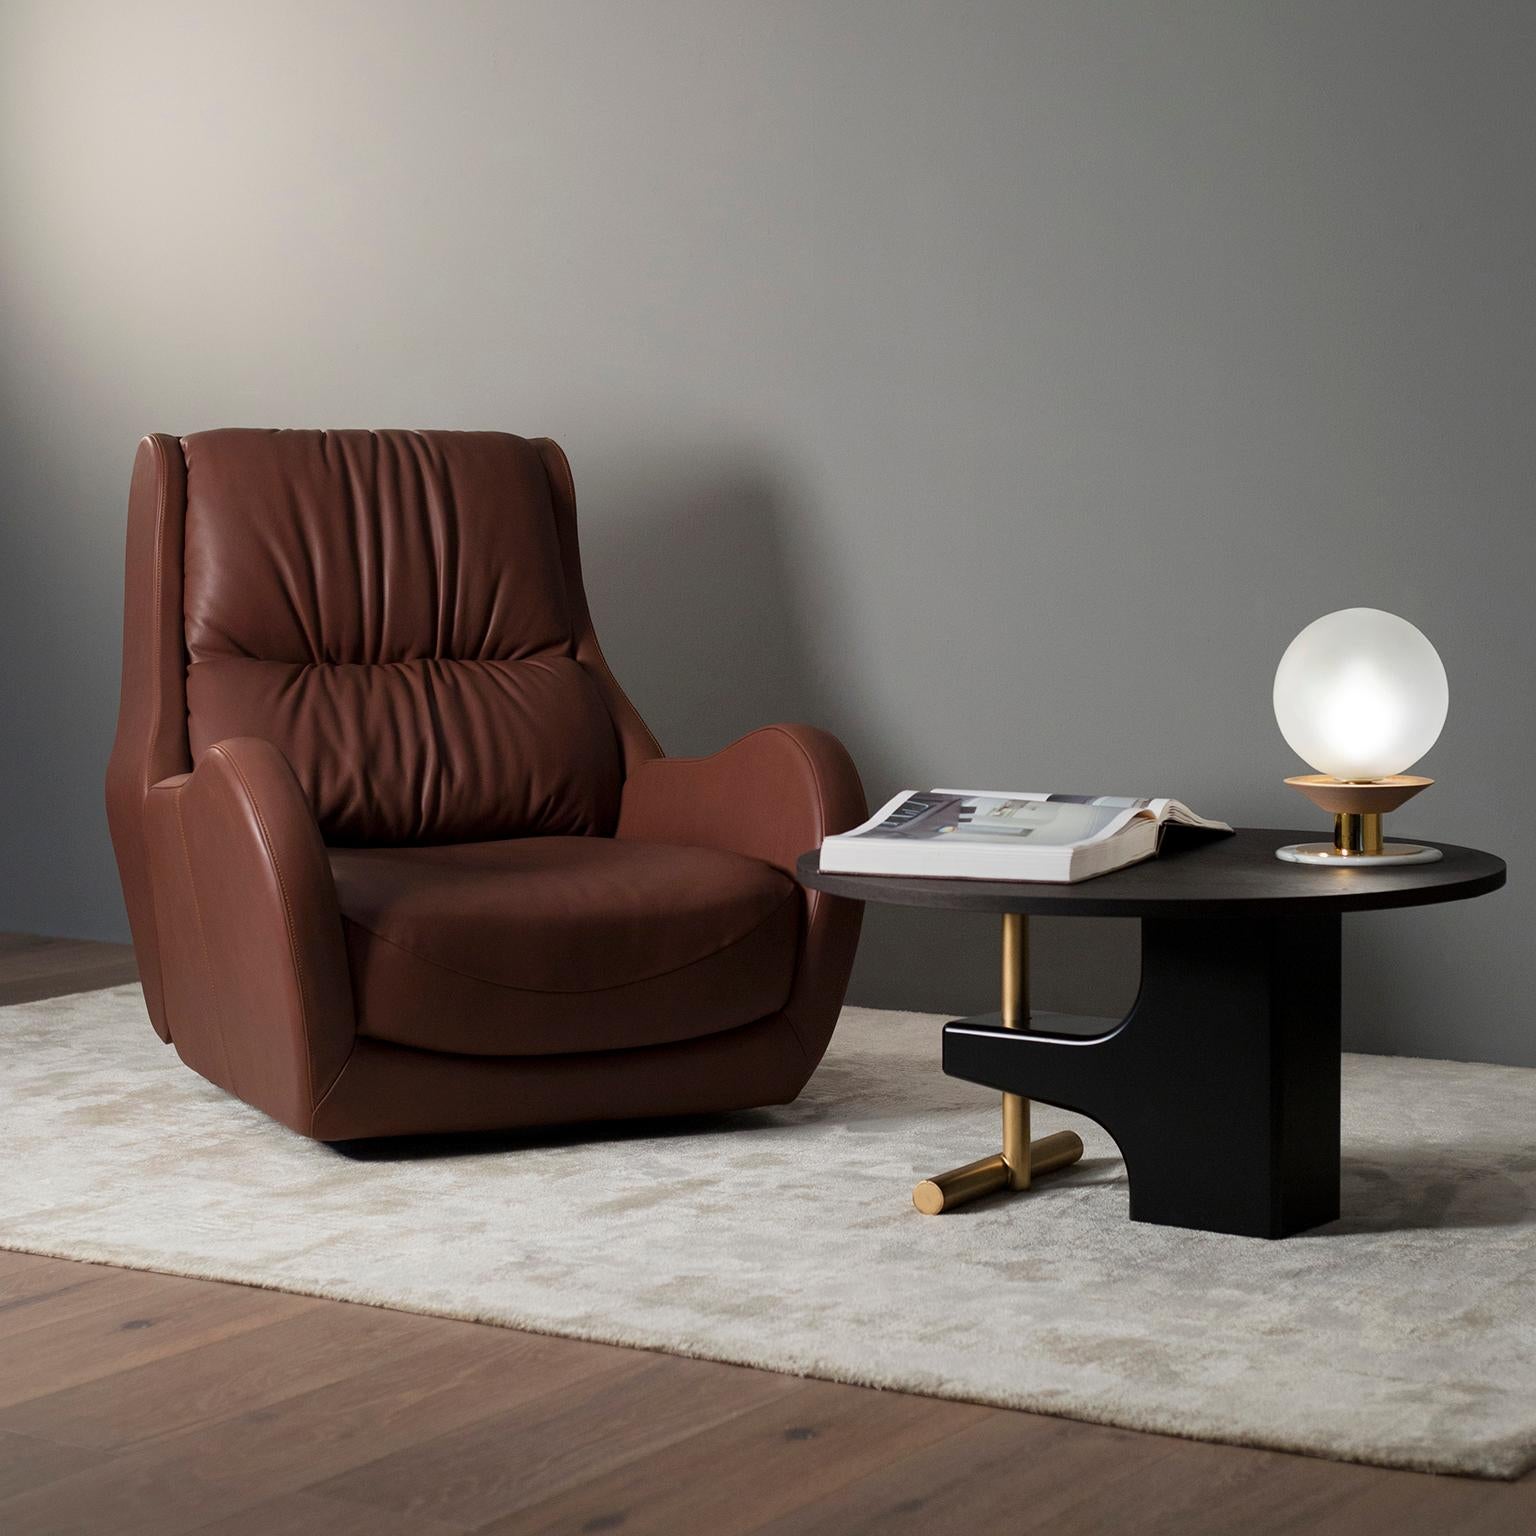 Capelinhos Swivel Lounge Chair with foot rest, Contemporary Collection, Handcrafted in Portugal - Europe by Greenapple.

The Capelinhos leather lounge chair stands as a testament to timeless comfort. Much like a fine wine, Capelinhos ages gracefully